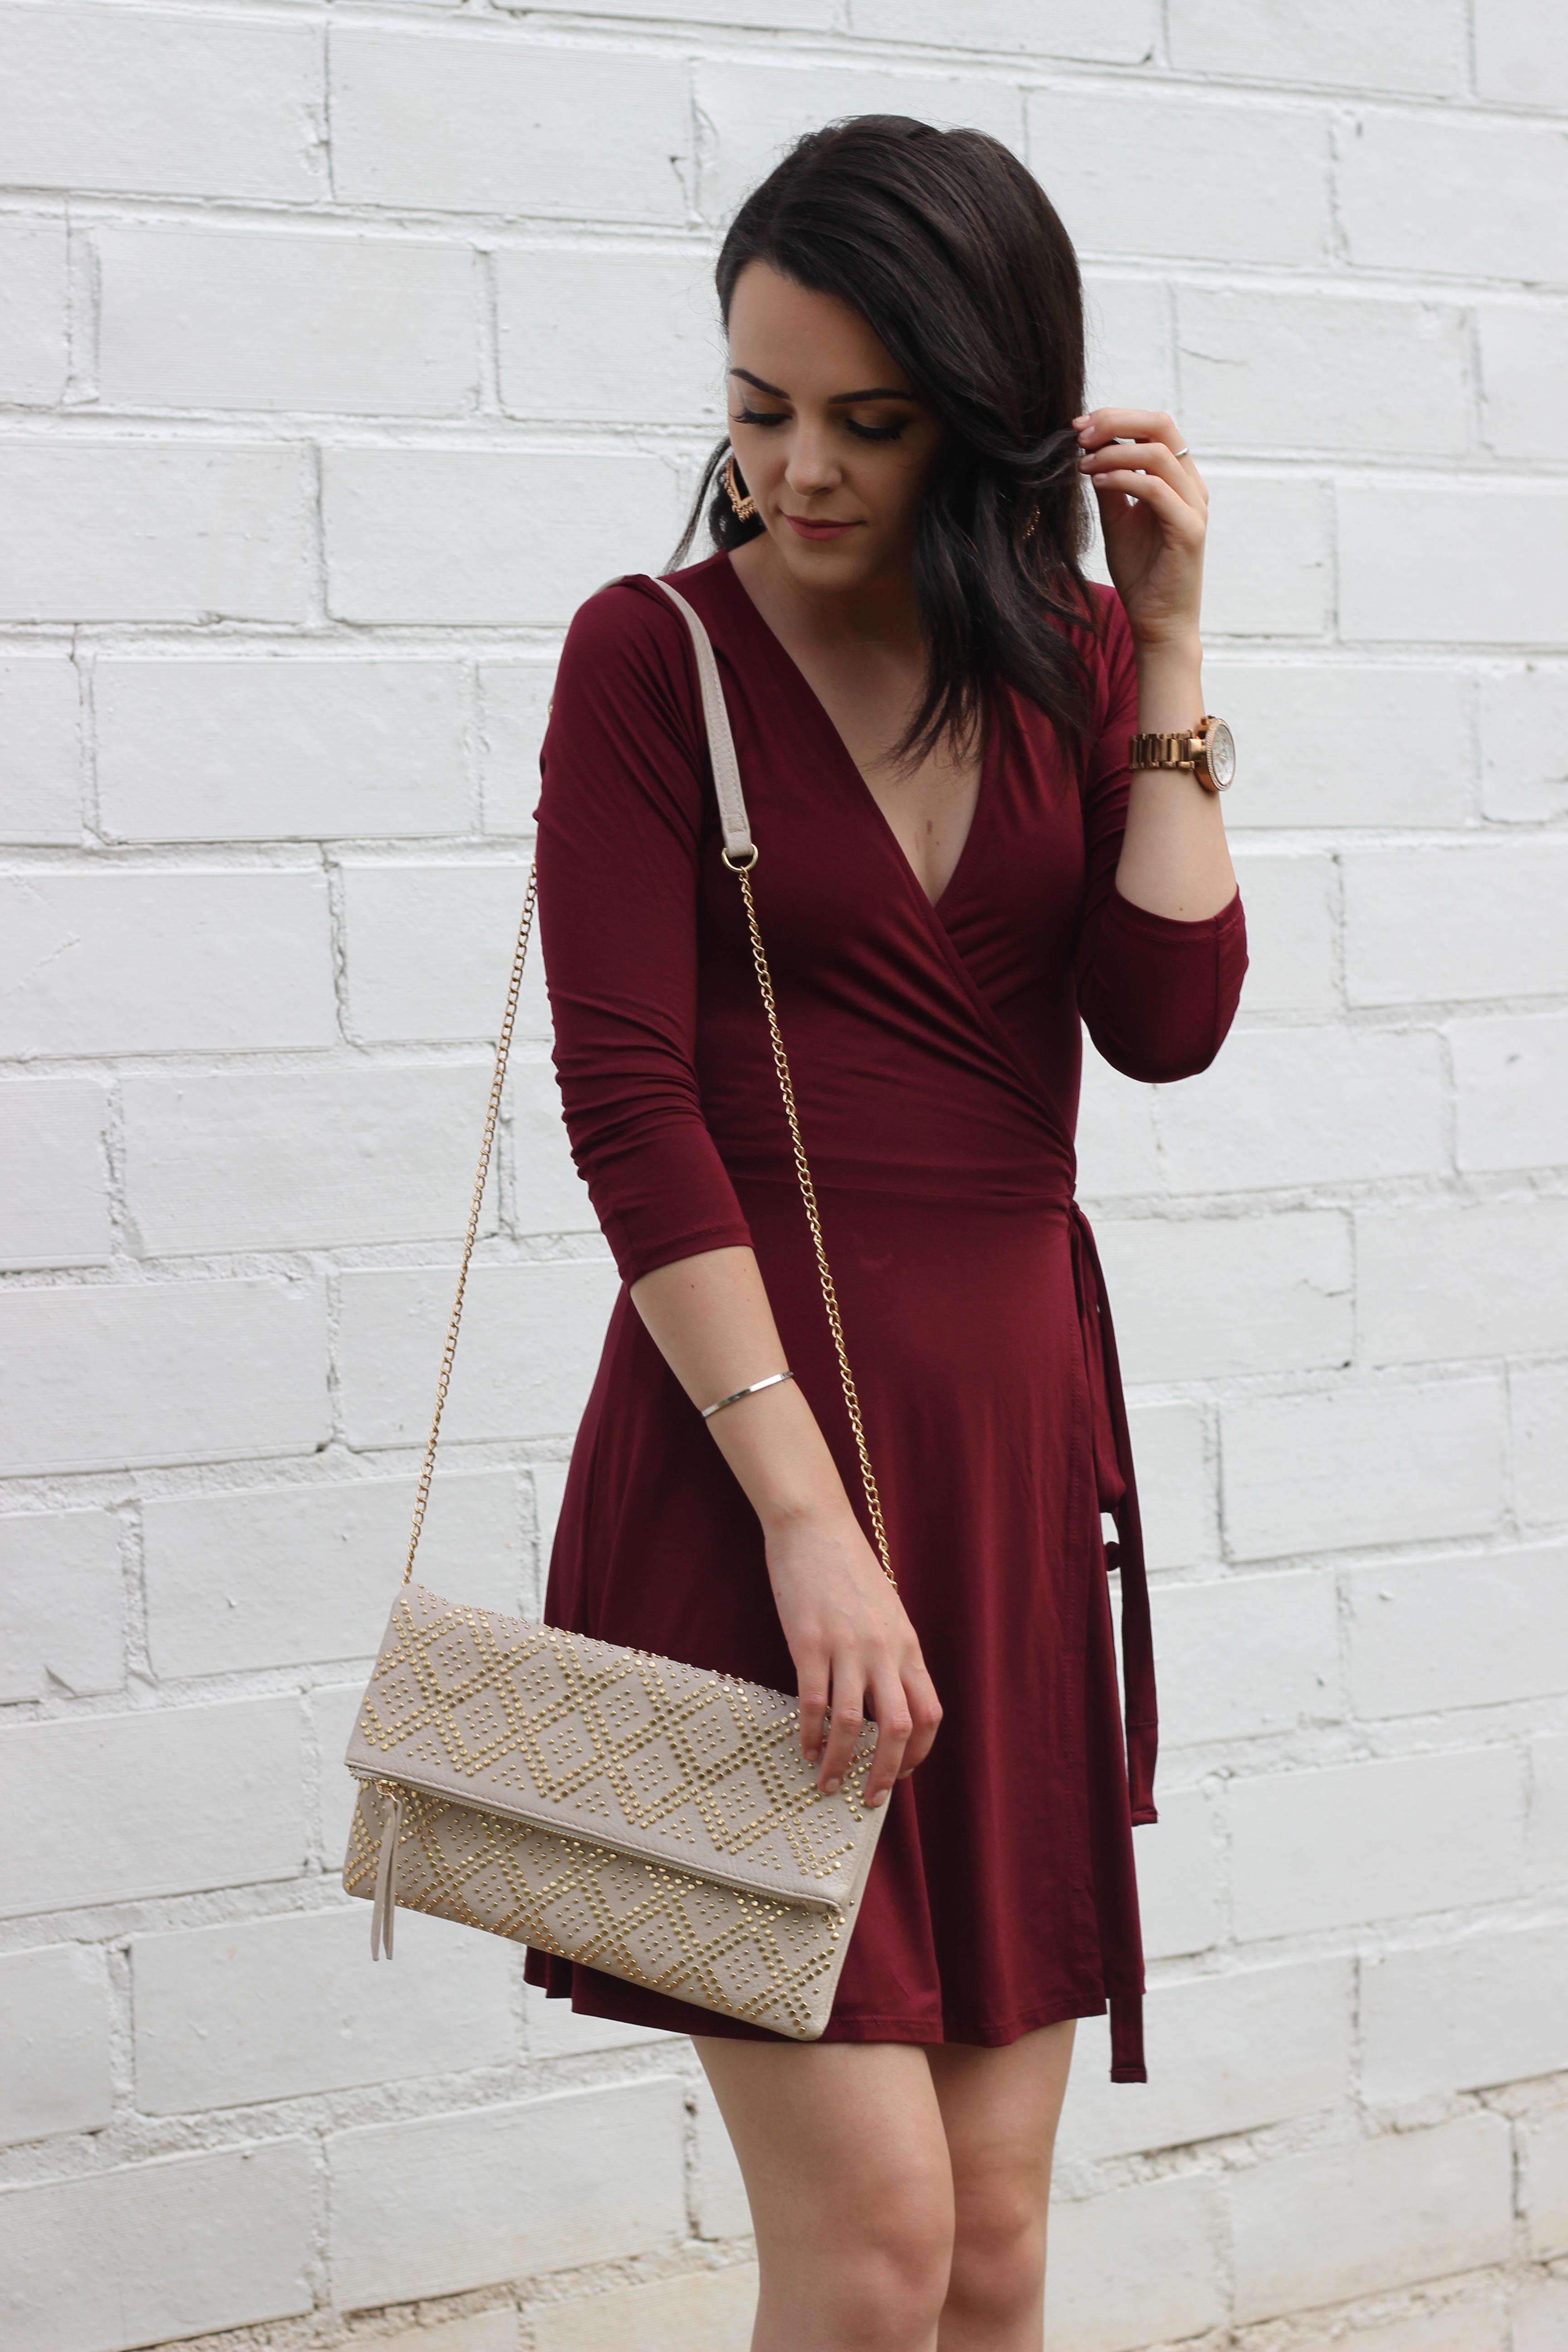 Wrap Dress : Wedding Guest Outfit